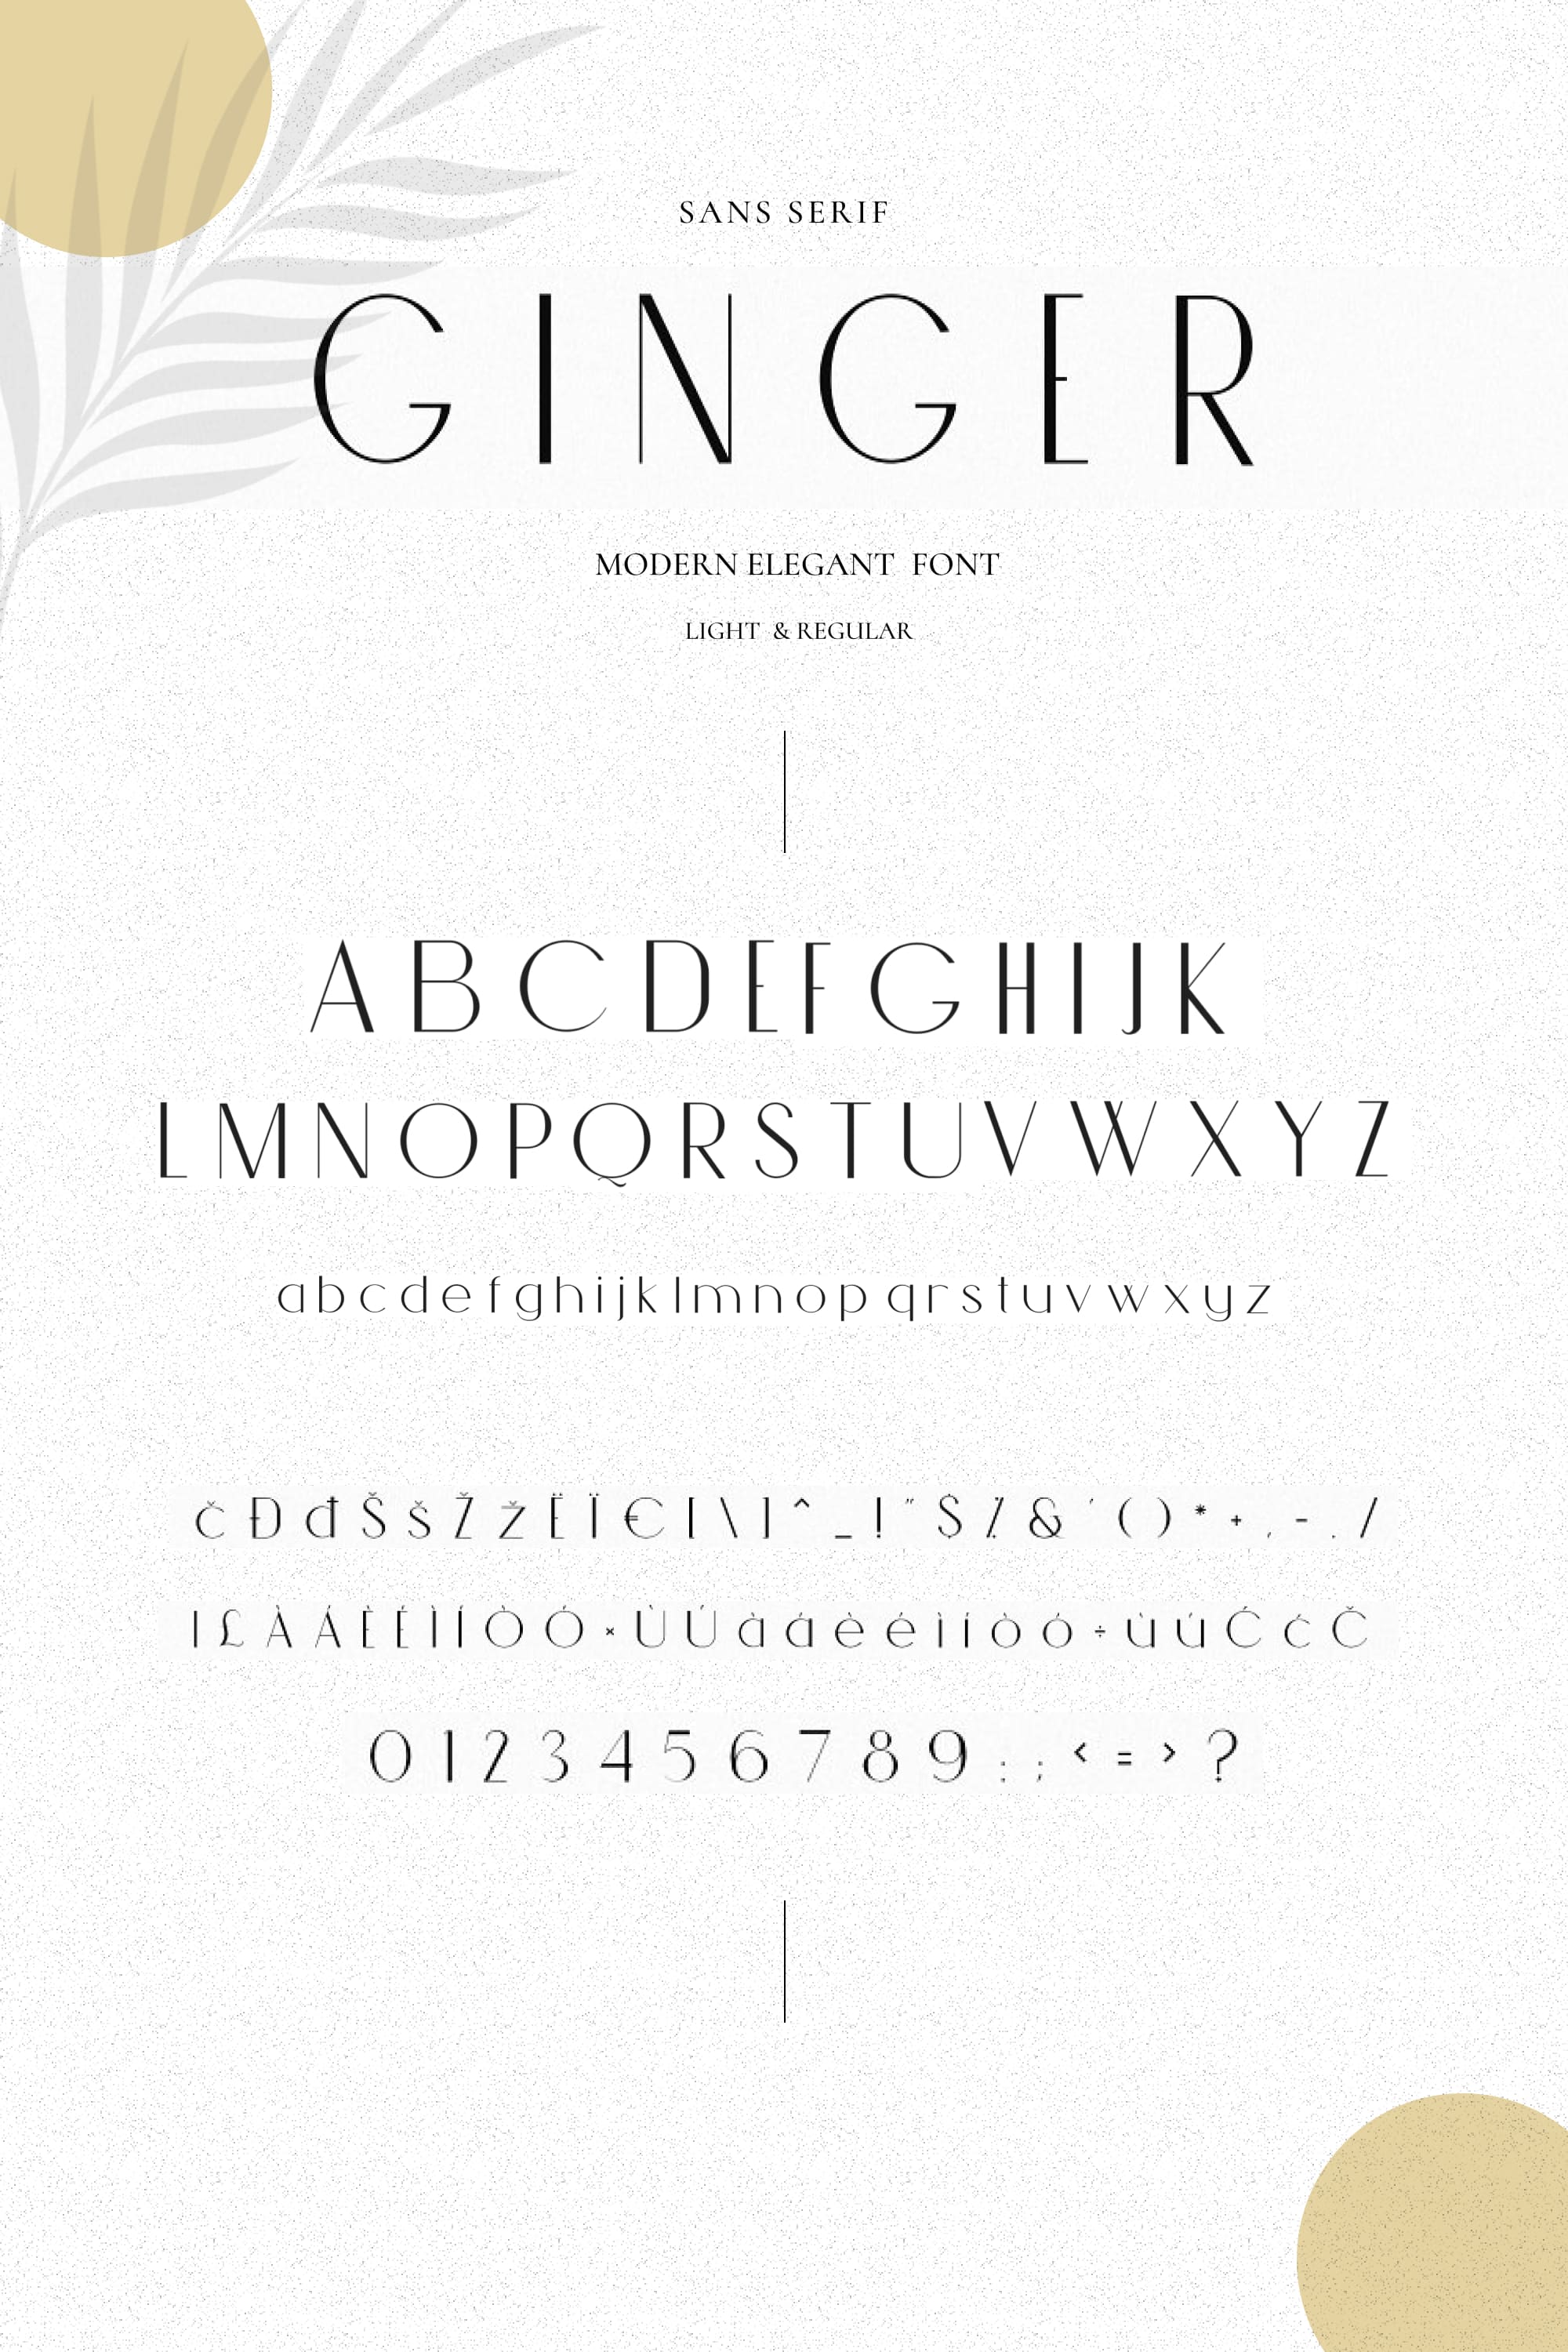 An example of a Ginger font in black on a gray background.